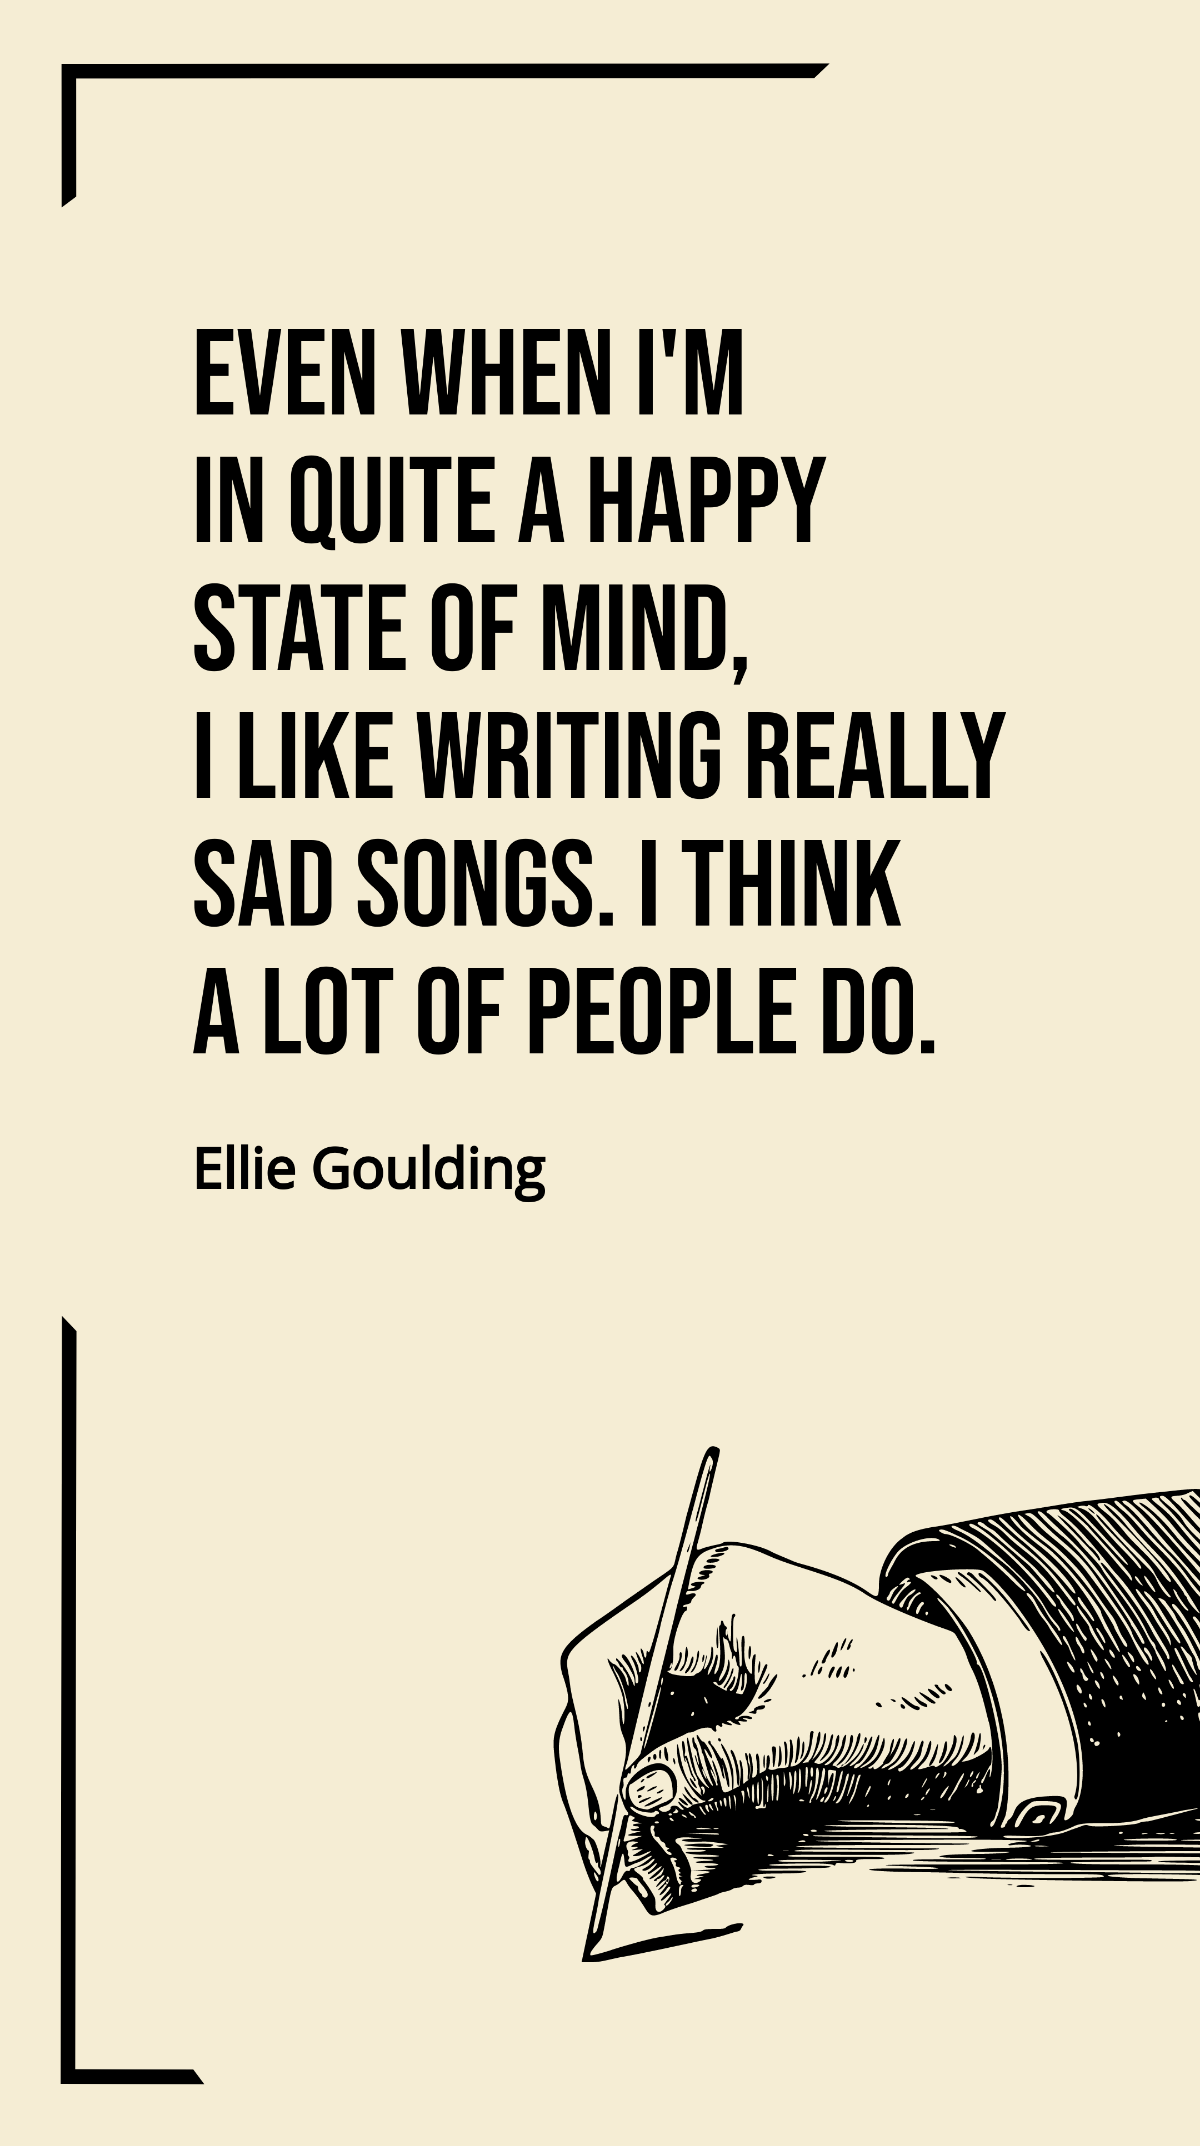 Ellie Goulding - Even when I'm in quite a happy state of mind, I like writing really sad songs. I think a lot of people do. Template